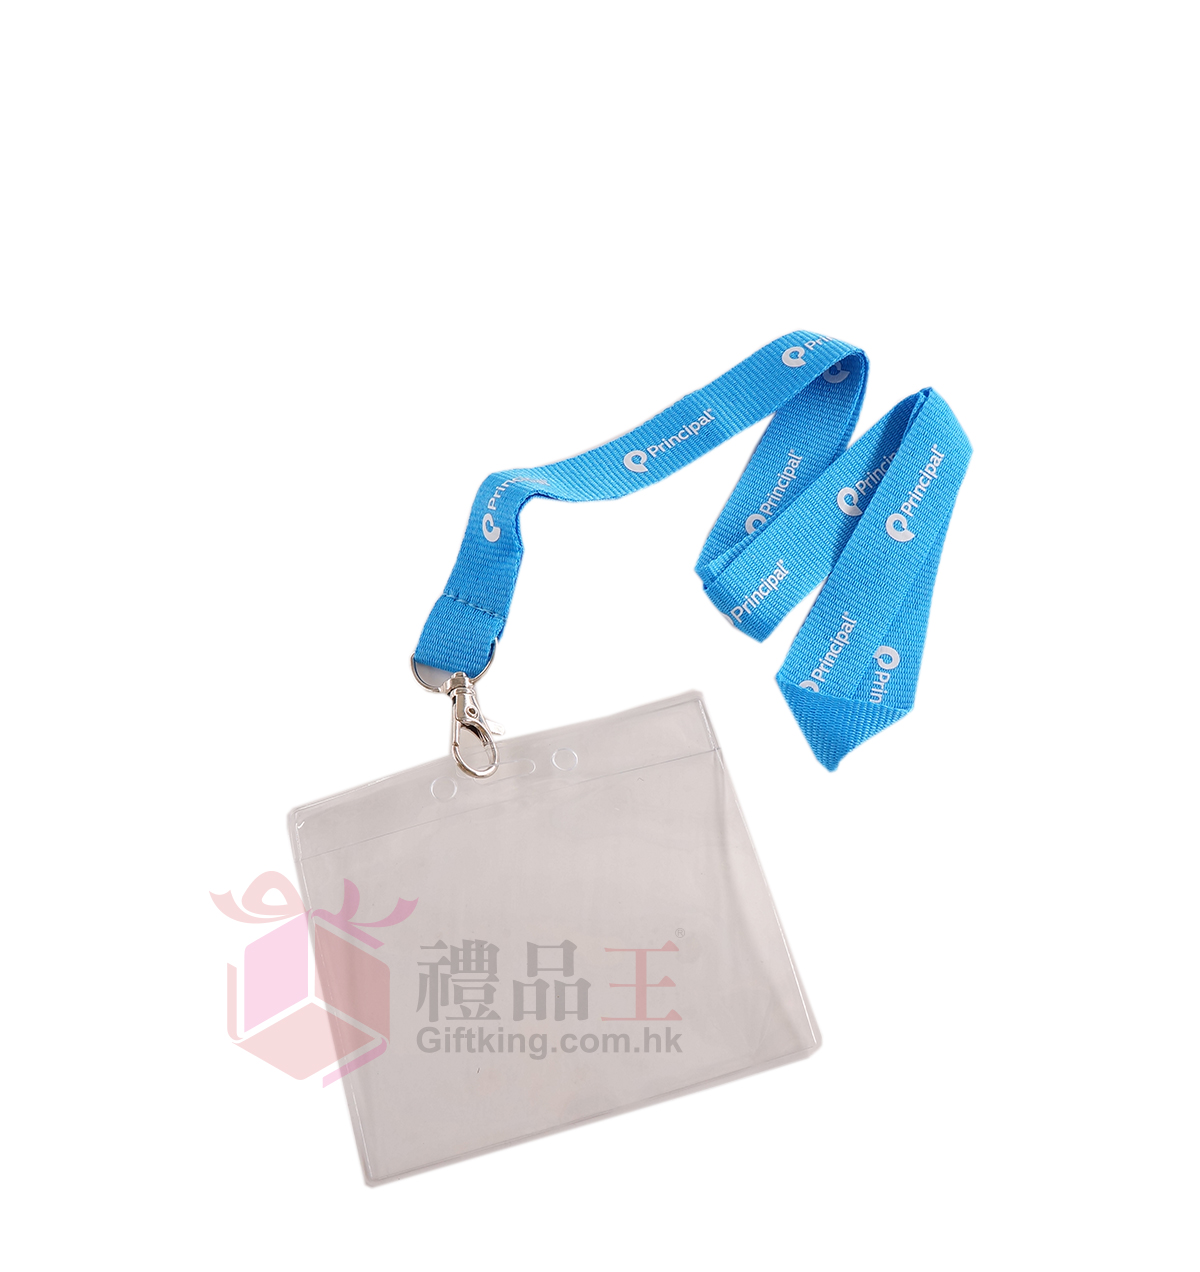 Principal Neckband with Transparent ID Cover  (Advertising Gift) 